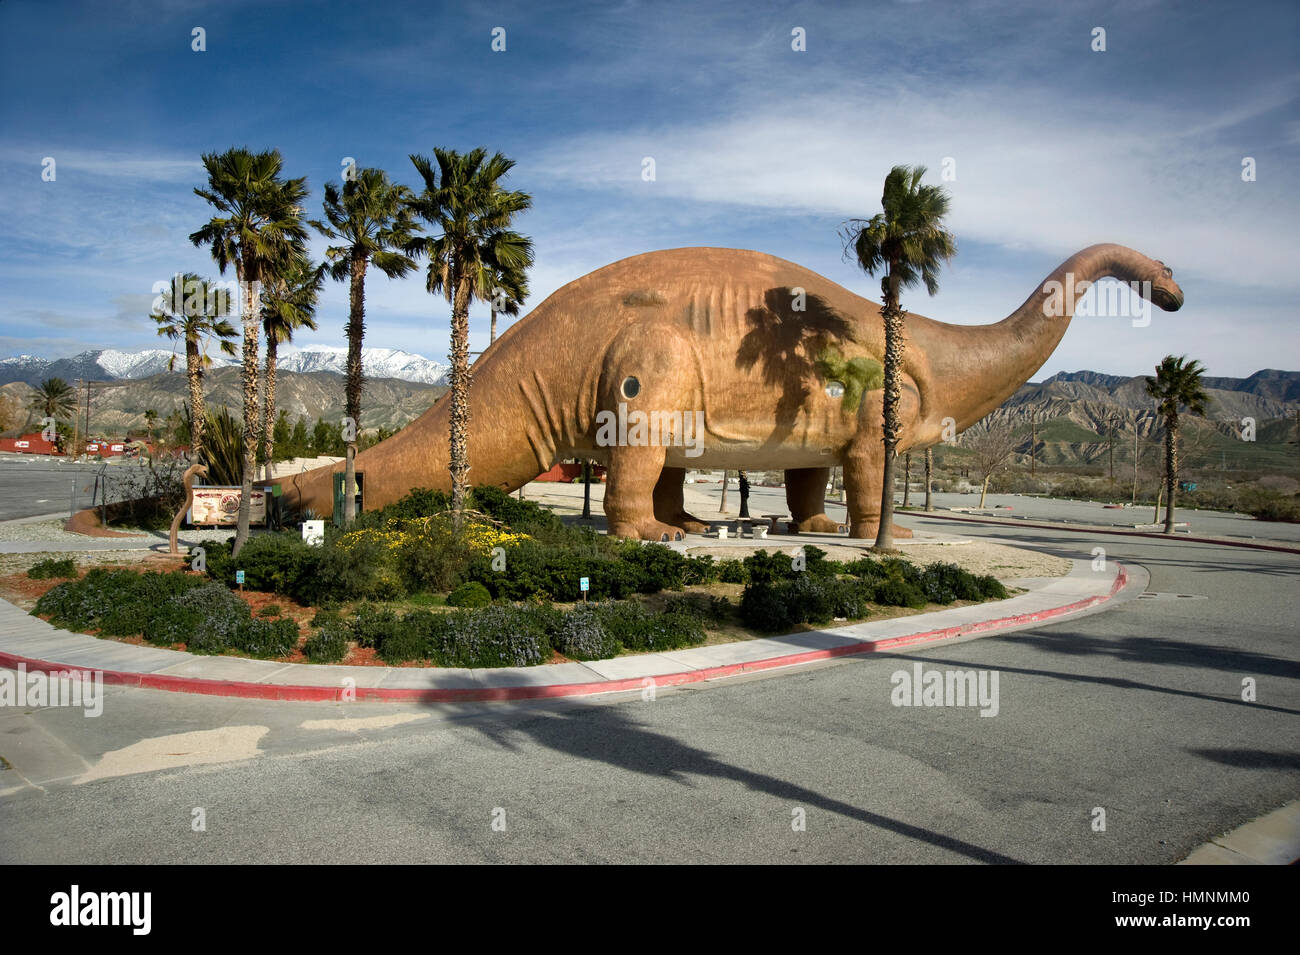 Life size replica of dinosaur as roadside attraction at Cabazon en route to Palm Springs, California Stock Photo